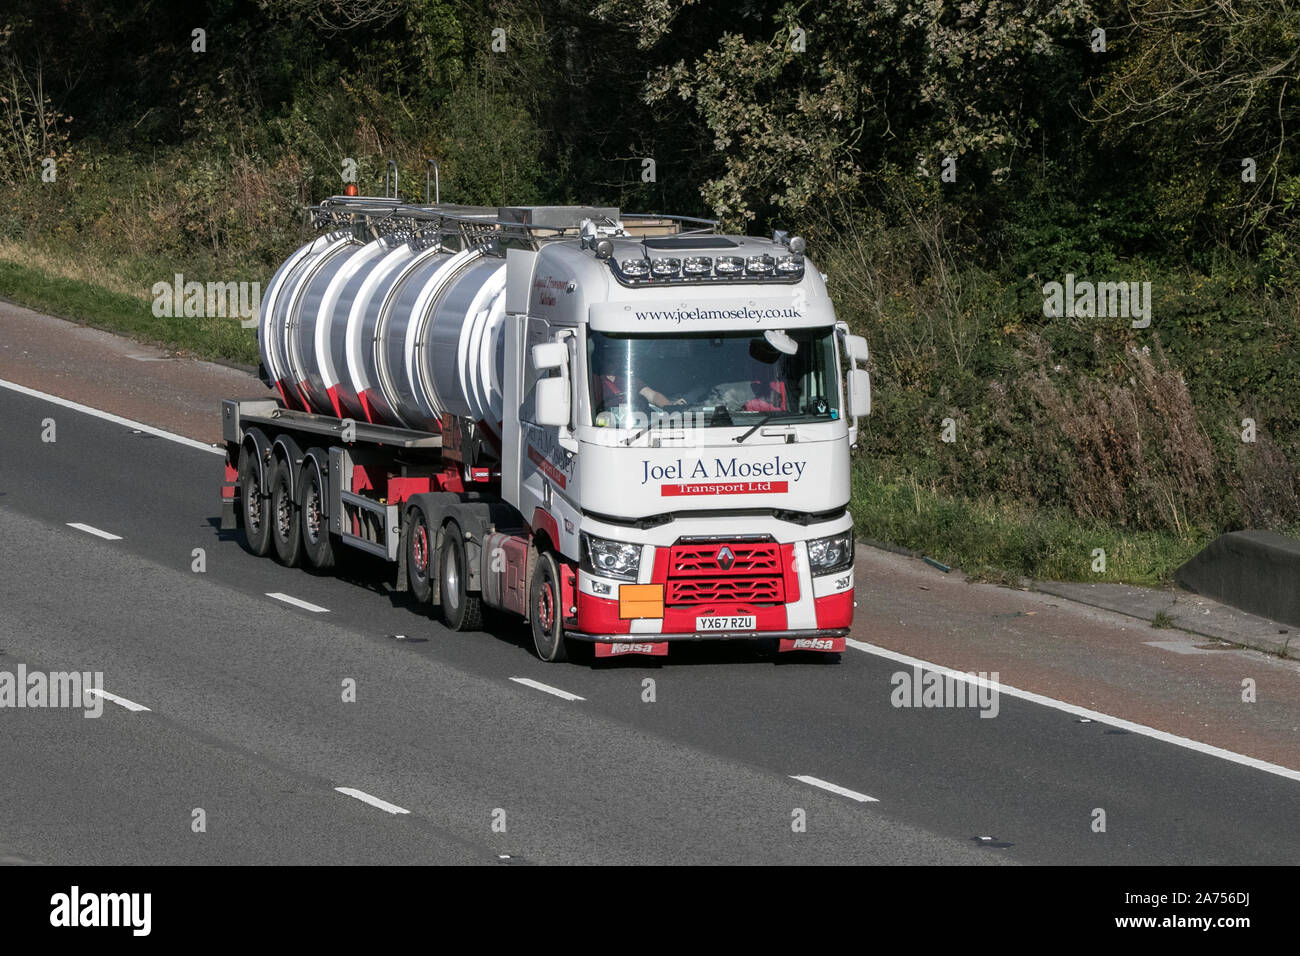 Joel A Moseley tanker transport renault articulated truck Stock Photo